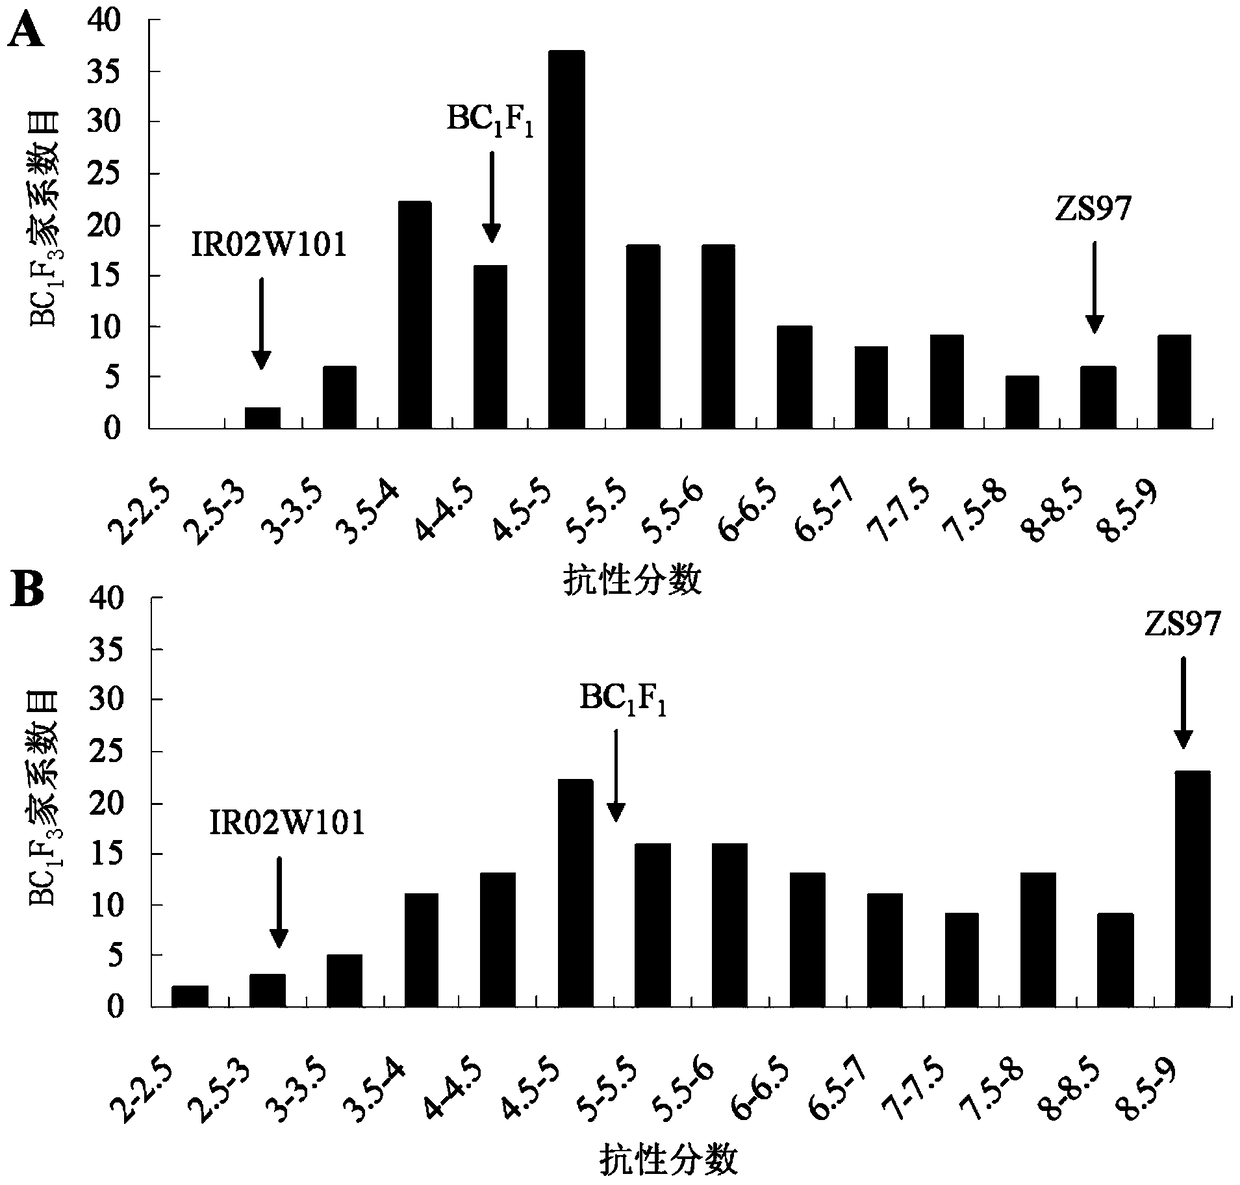 Molecular markers of rice resistance to brown planthopper qbph3 and qbph4 genes